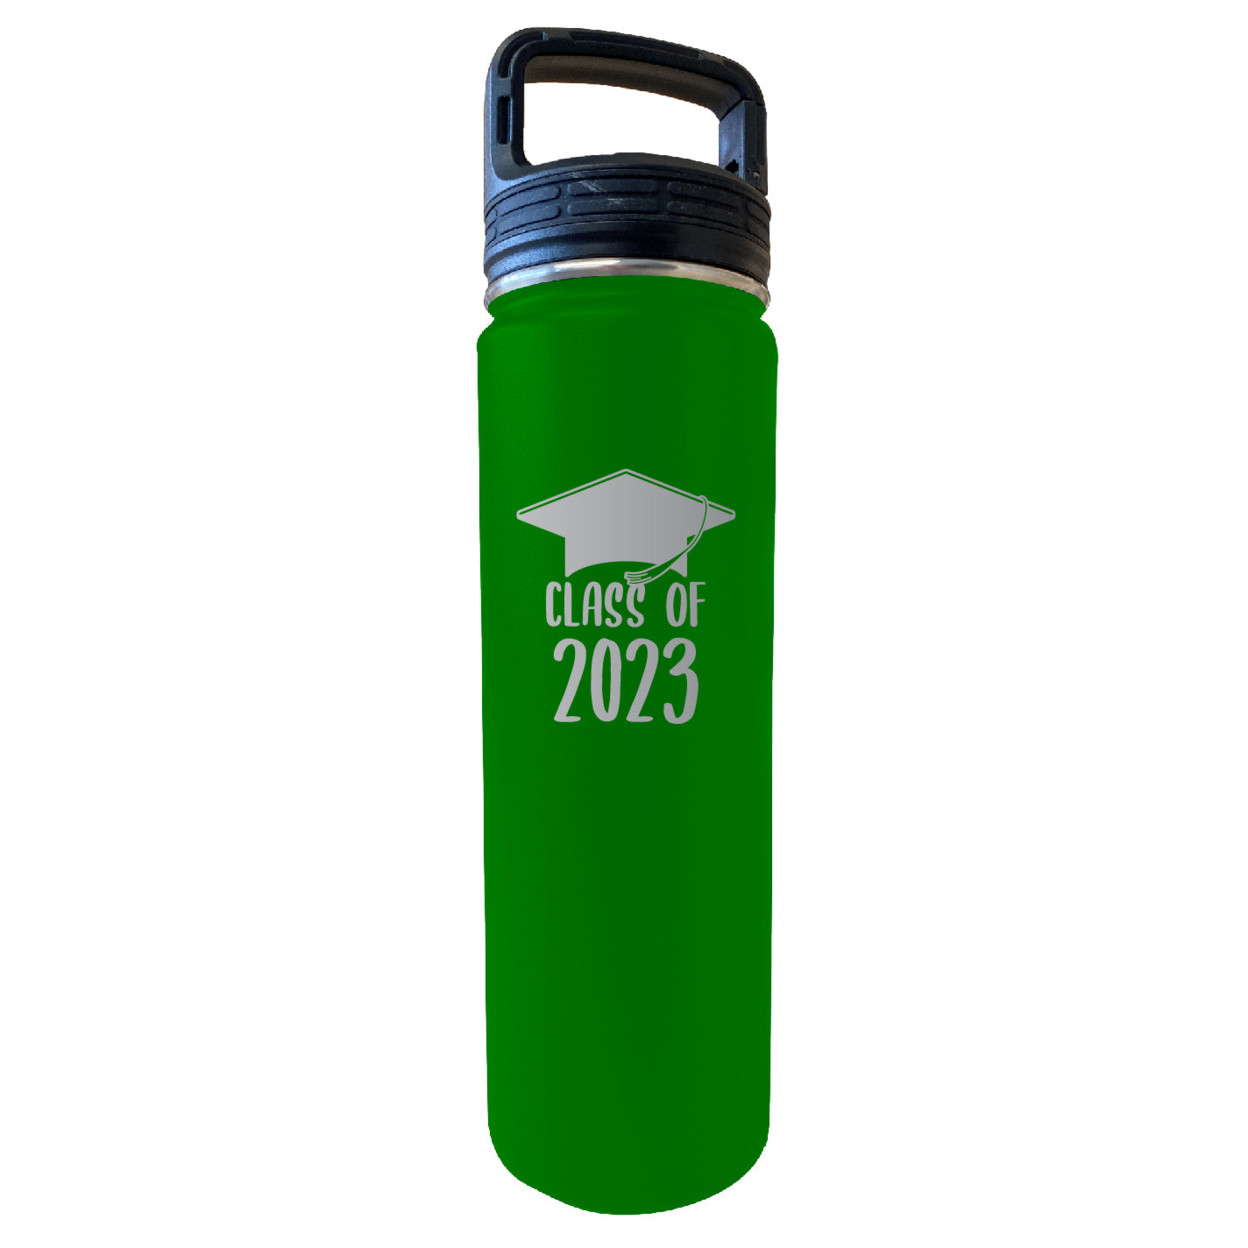 Class Of 2023 Graduation Senior 32 Oz Insulated Stainless Steel Tumbler - Green